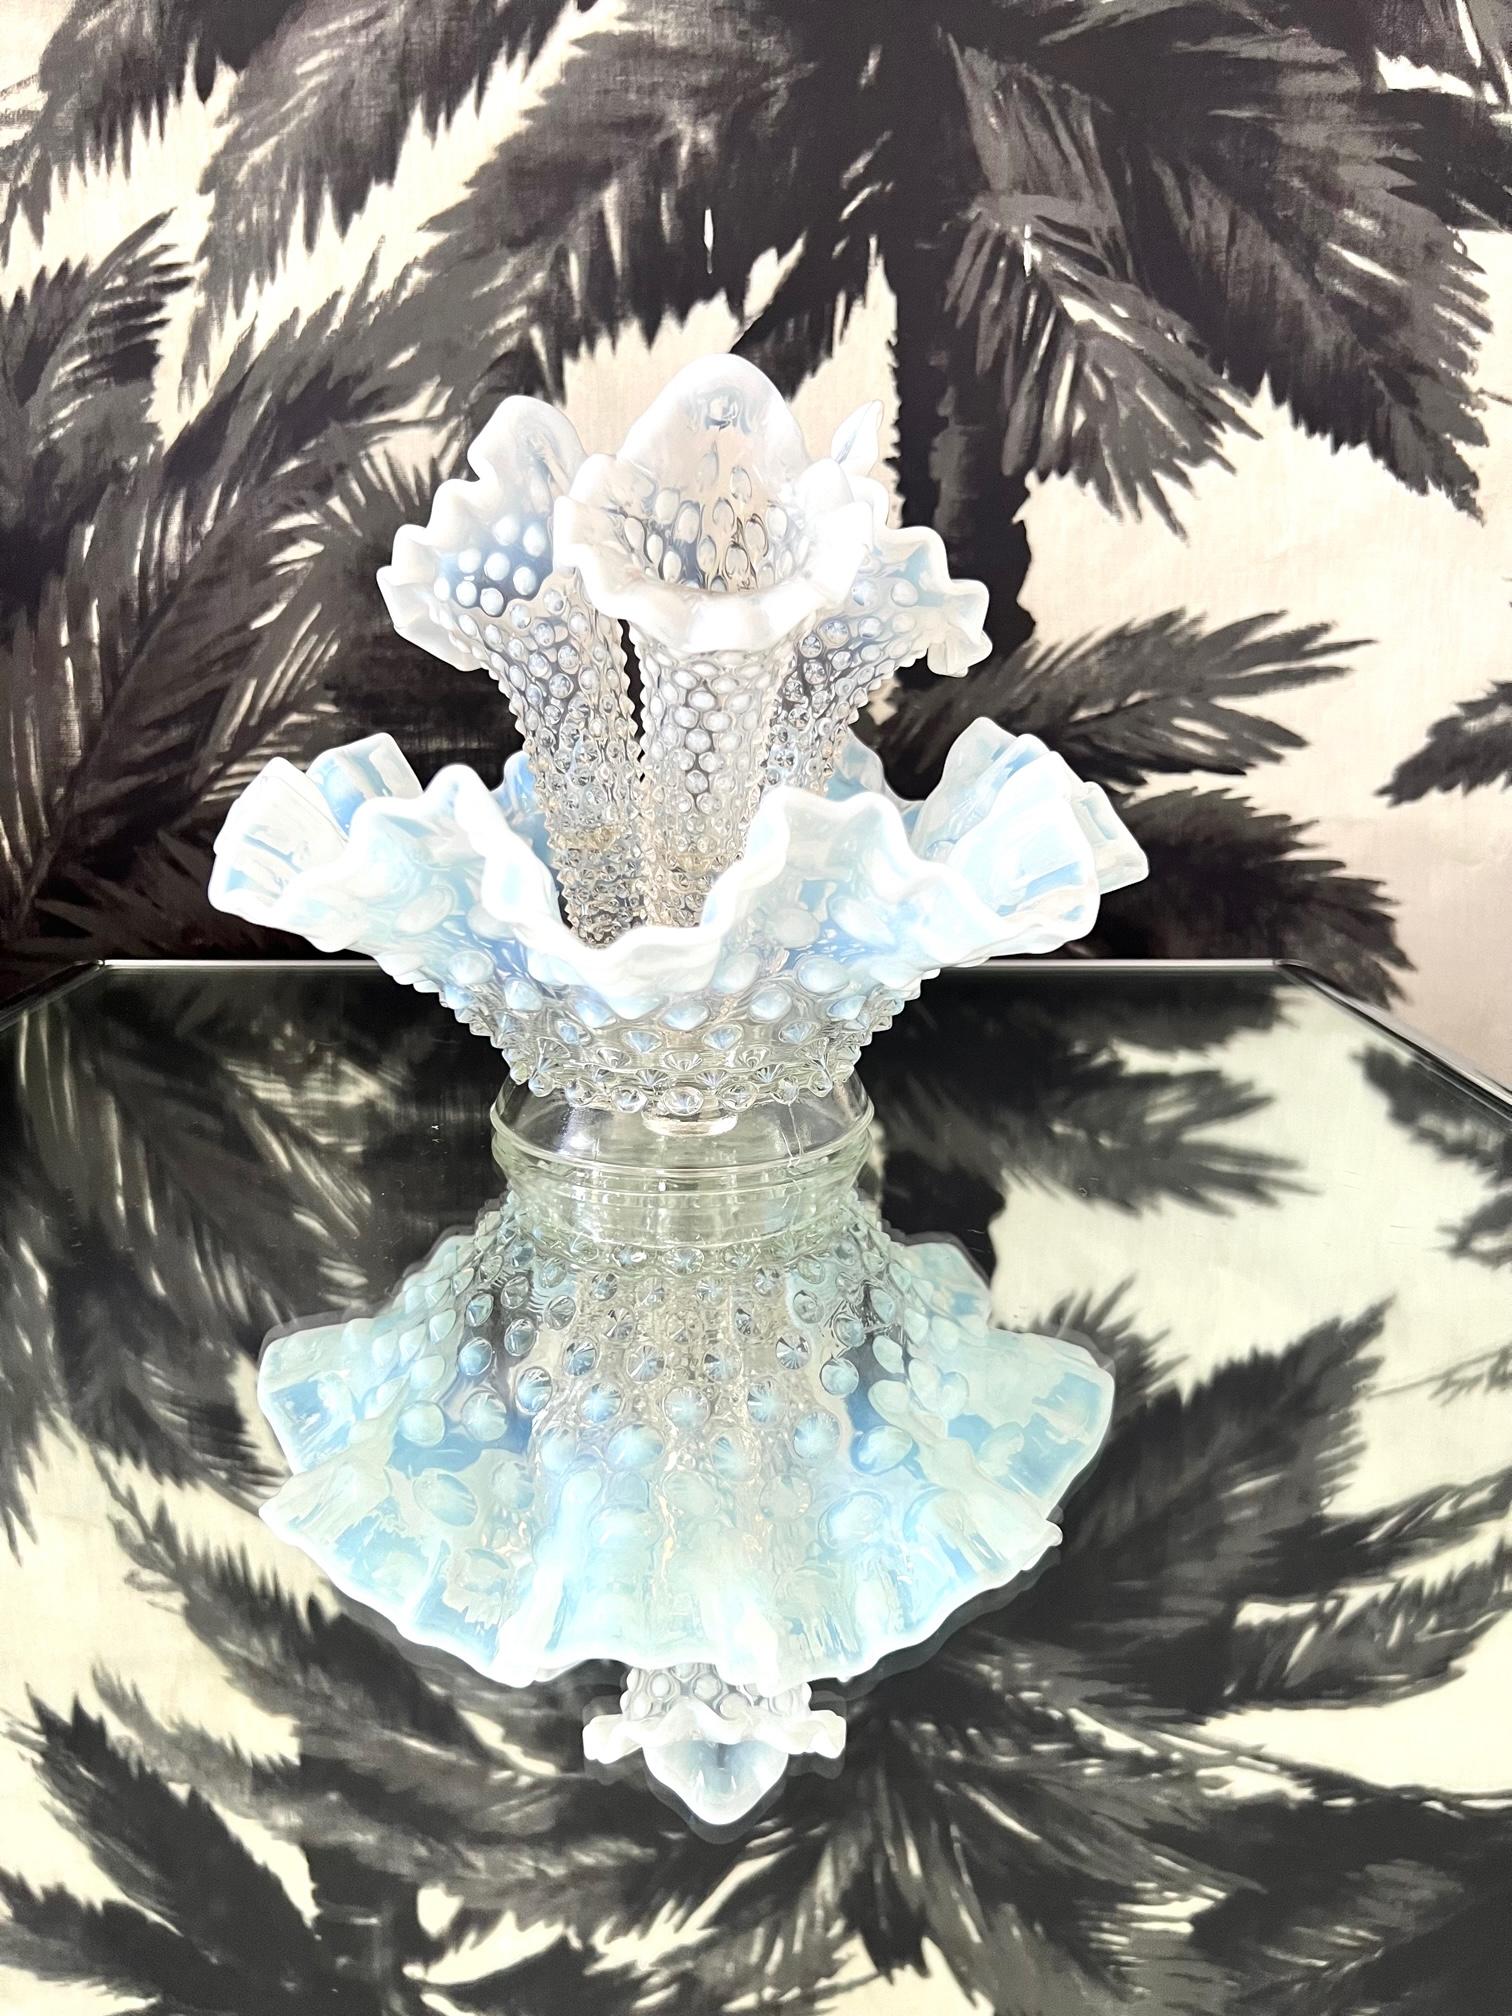 is hobnail glass valuable